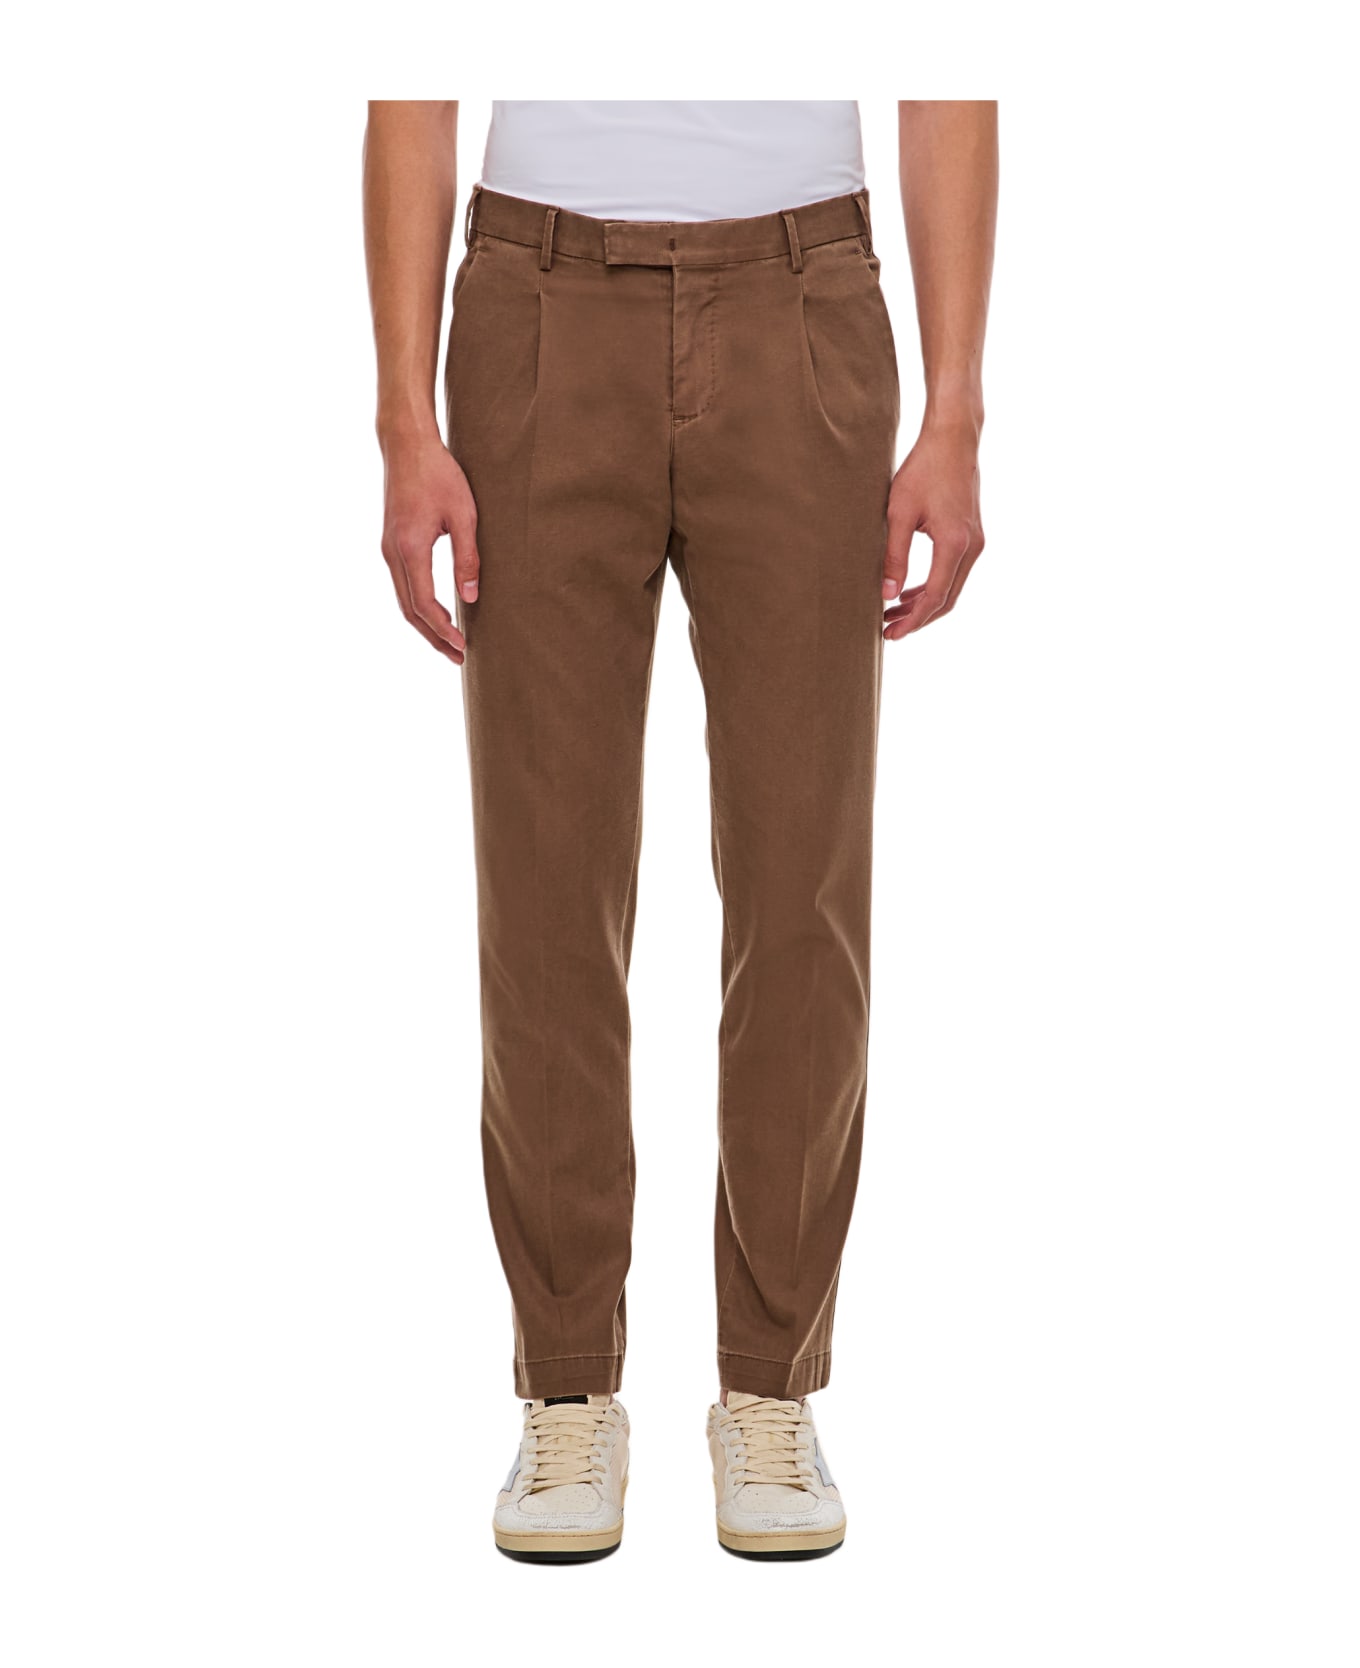 PT01 Cotton Trousers - Brown ボトムス